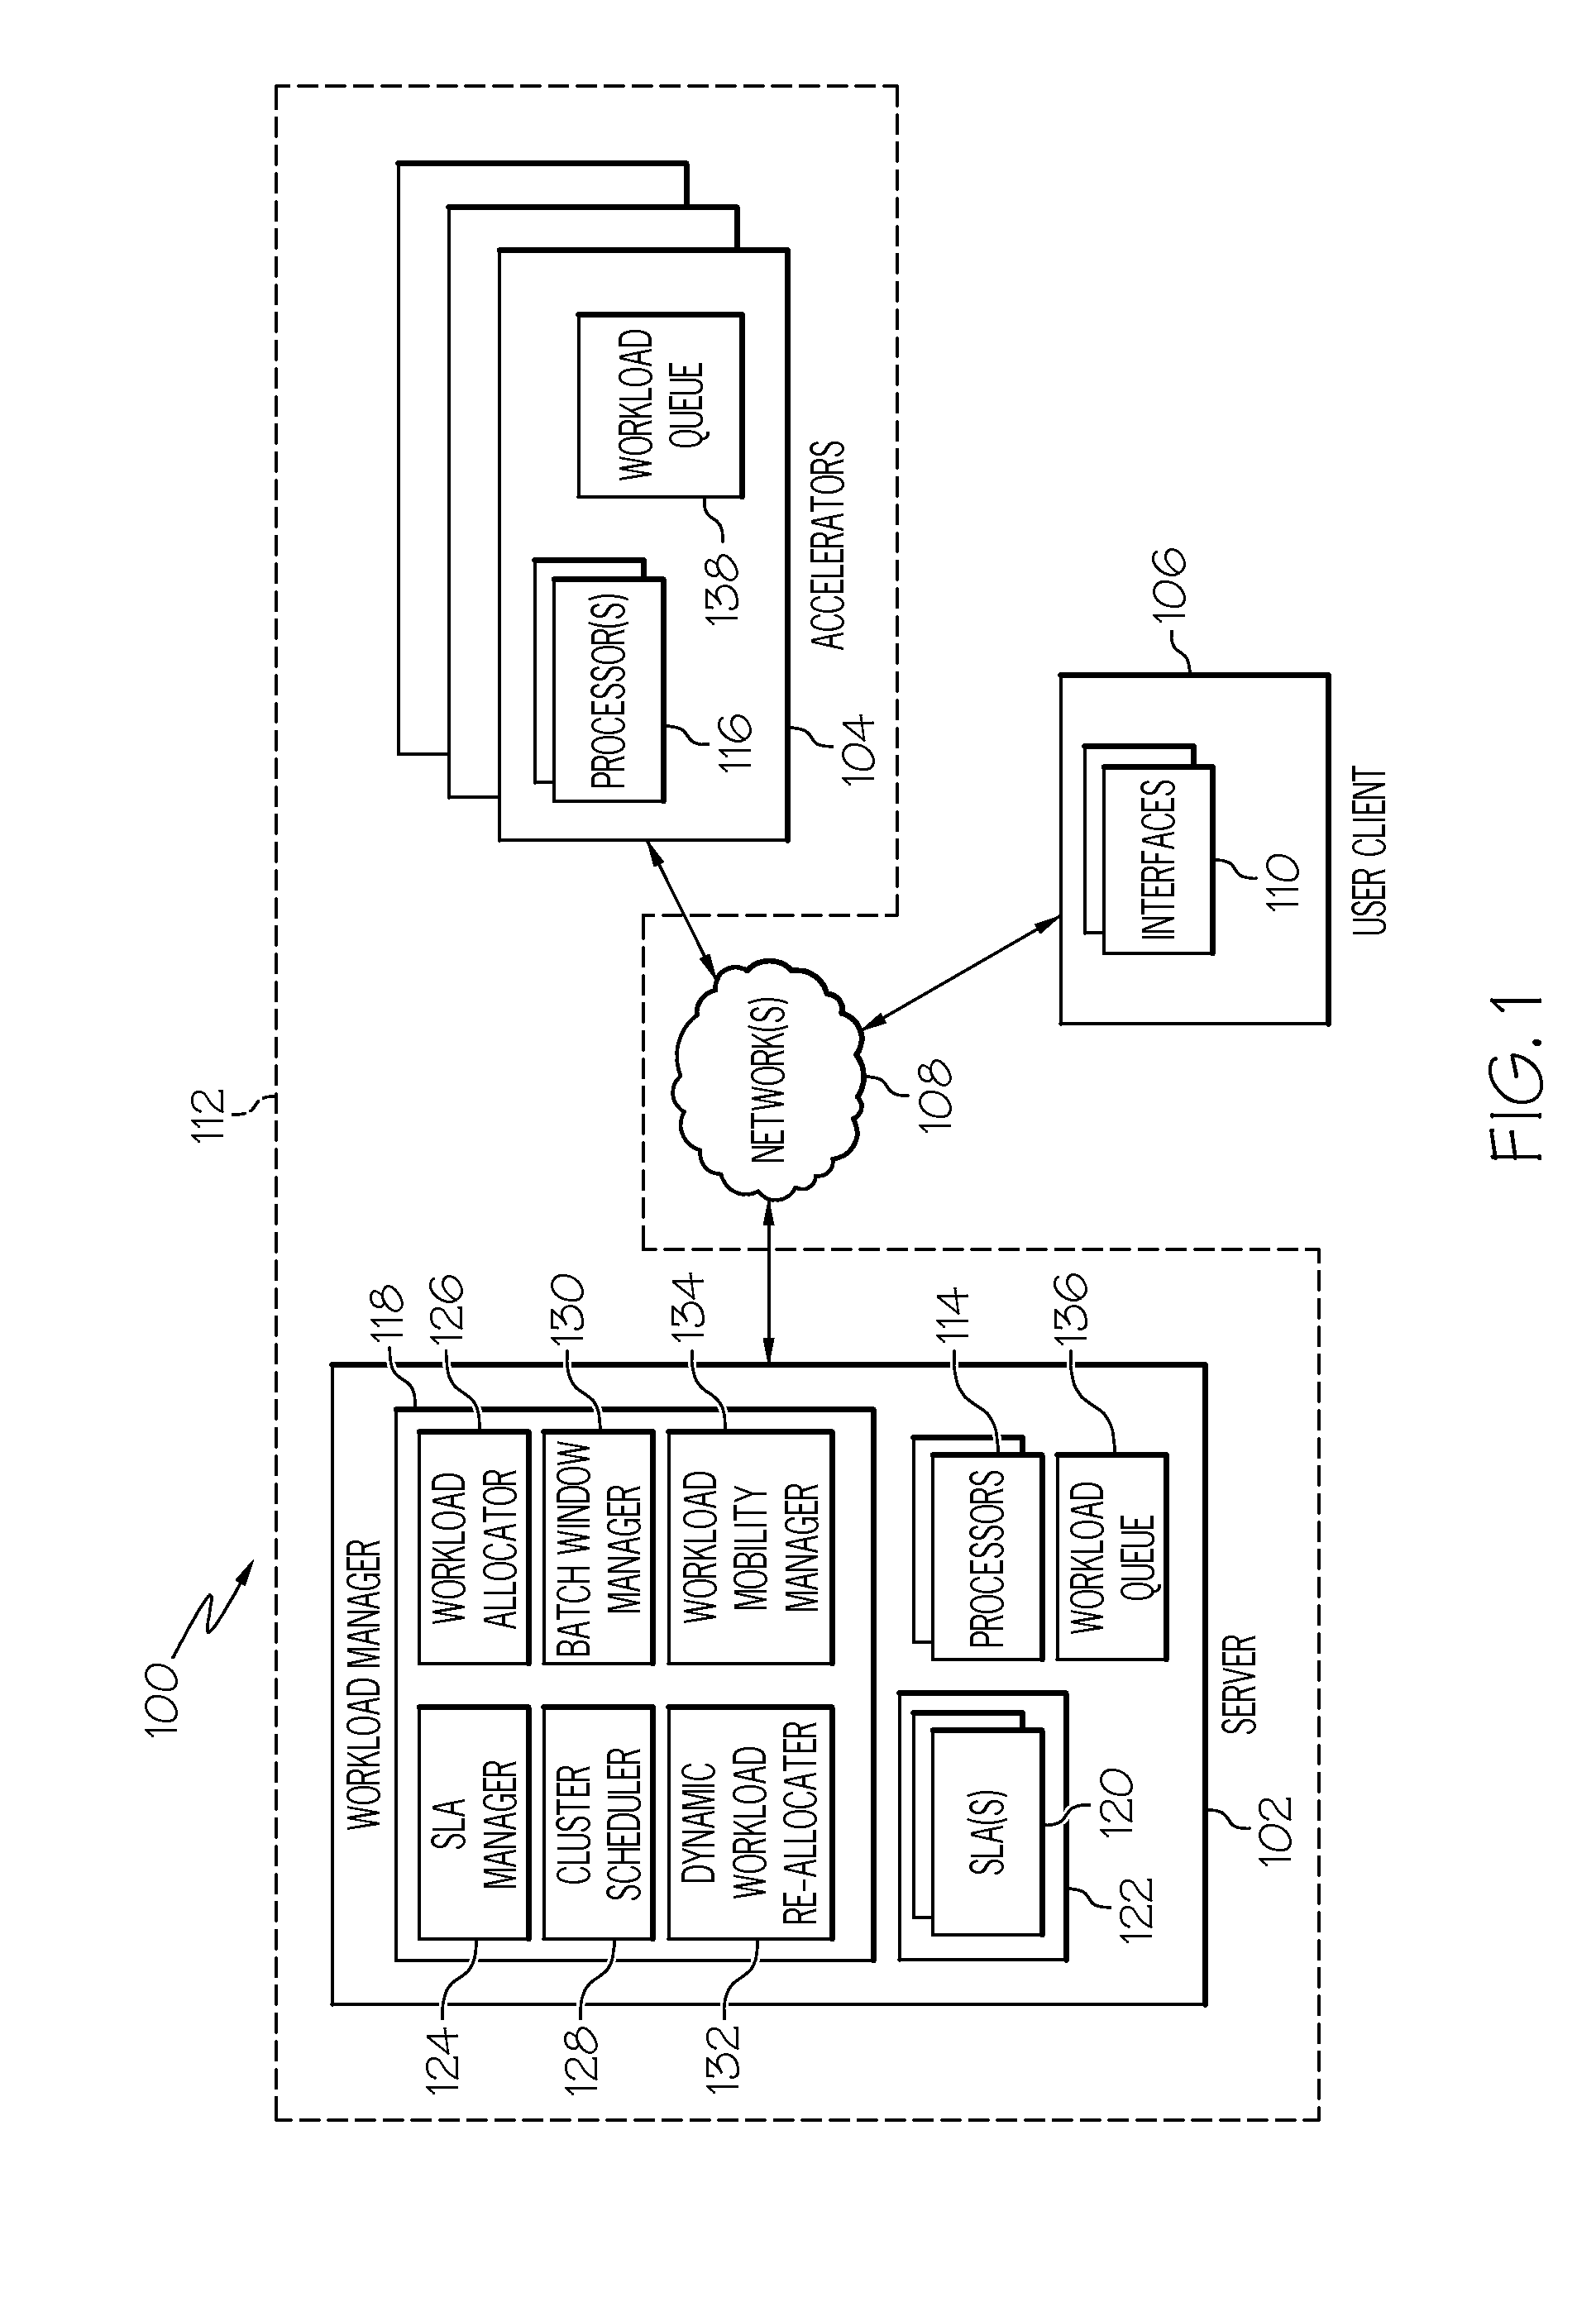 Rescheduling workload in a hybrid computing environment